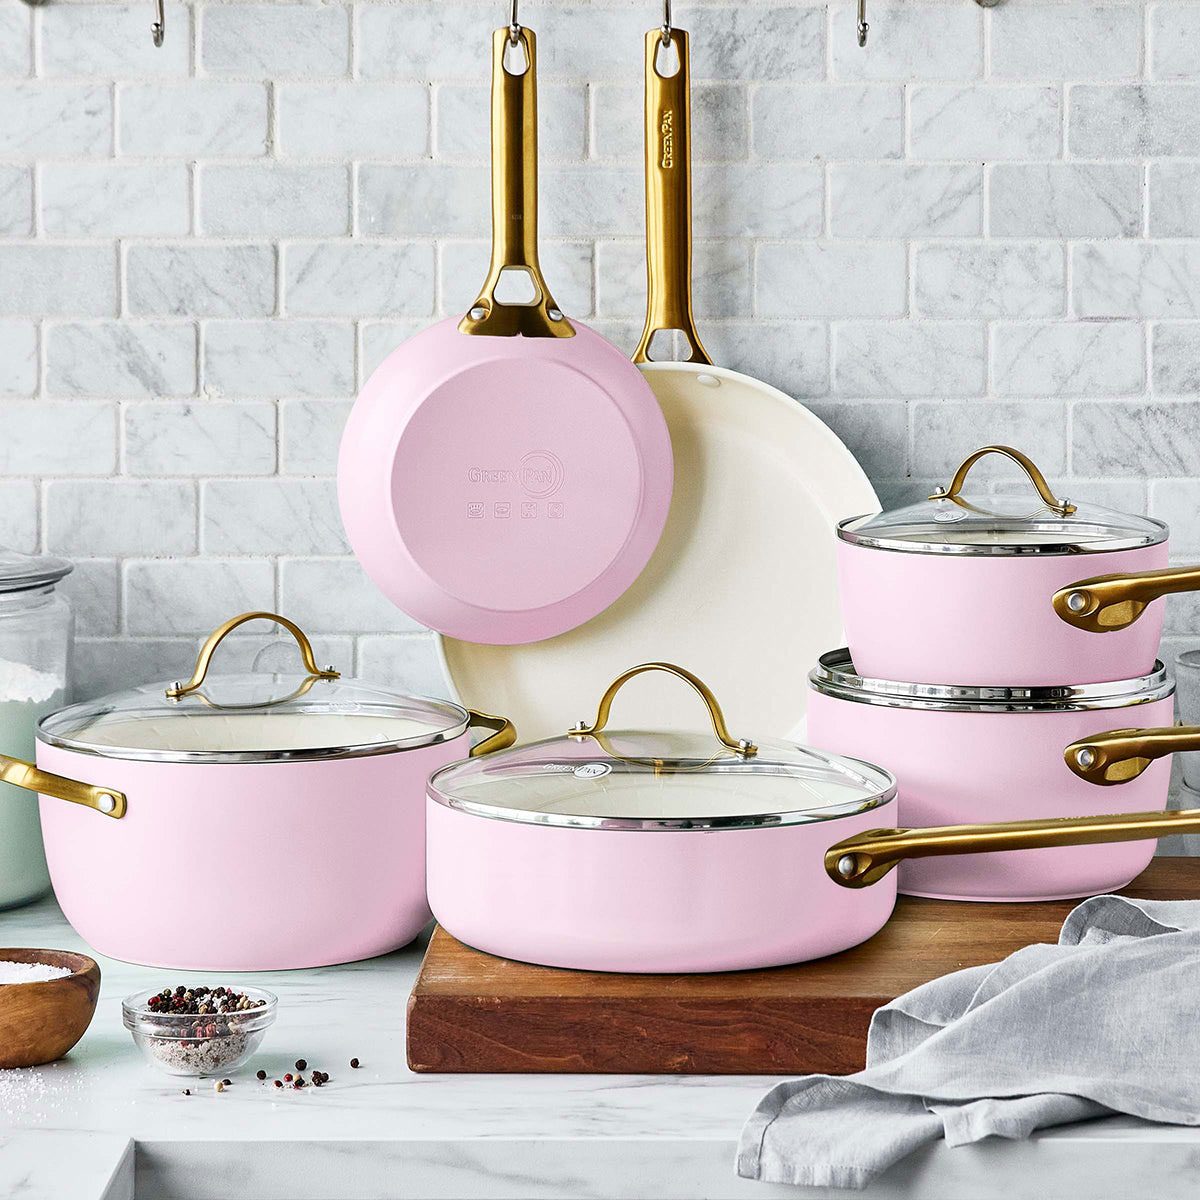 https://www.tasteofhome.com/wp-content/uploads/2023/01/greenpan-reserve-collection-in-pink-via-greenpan.us-ecomm.jpg?fit=700%2C700